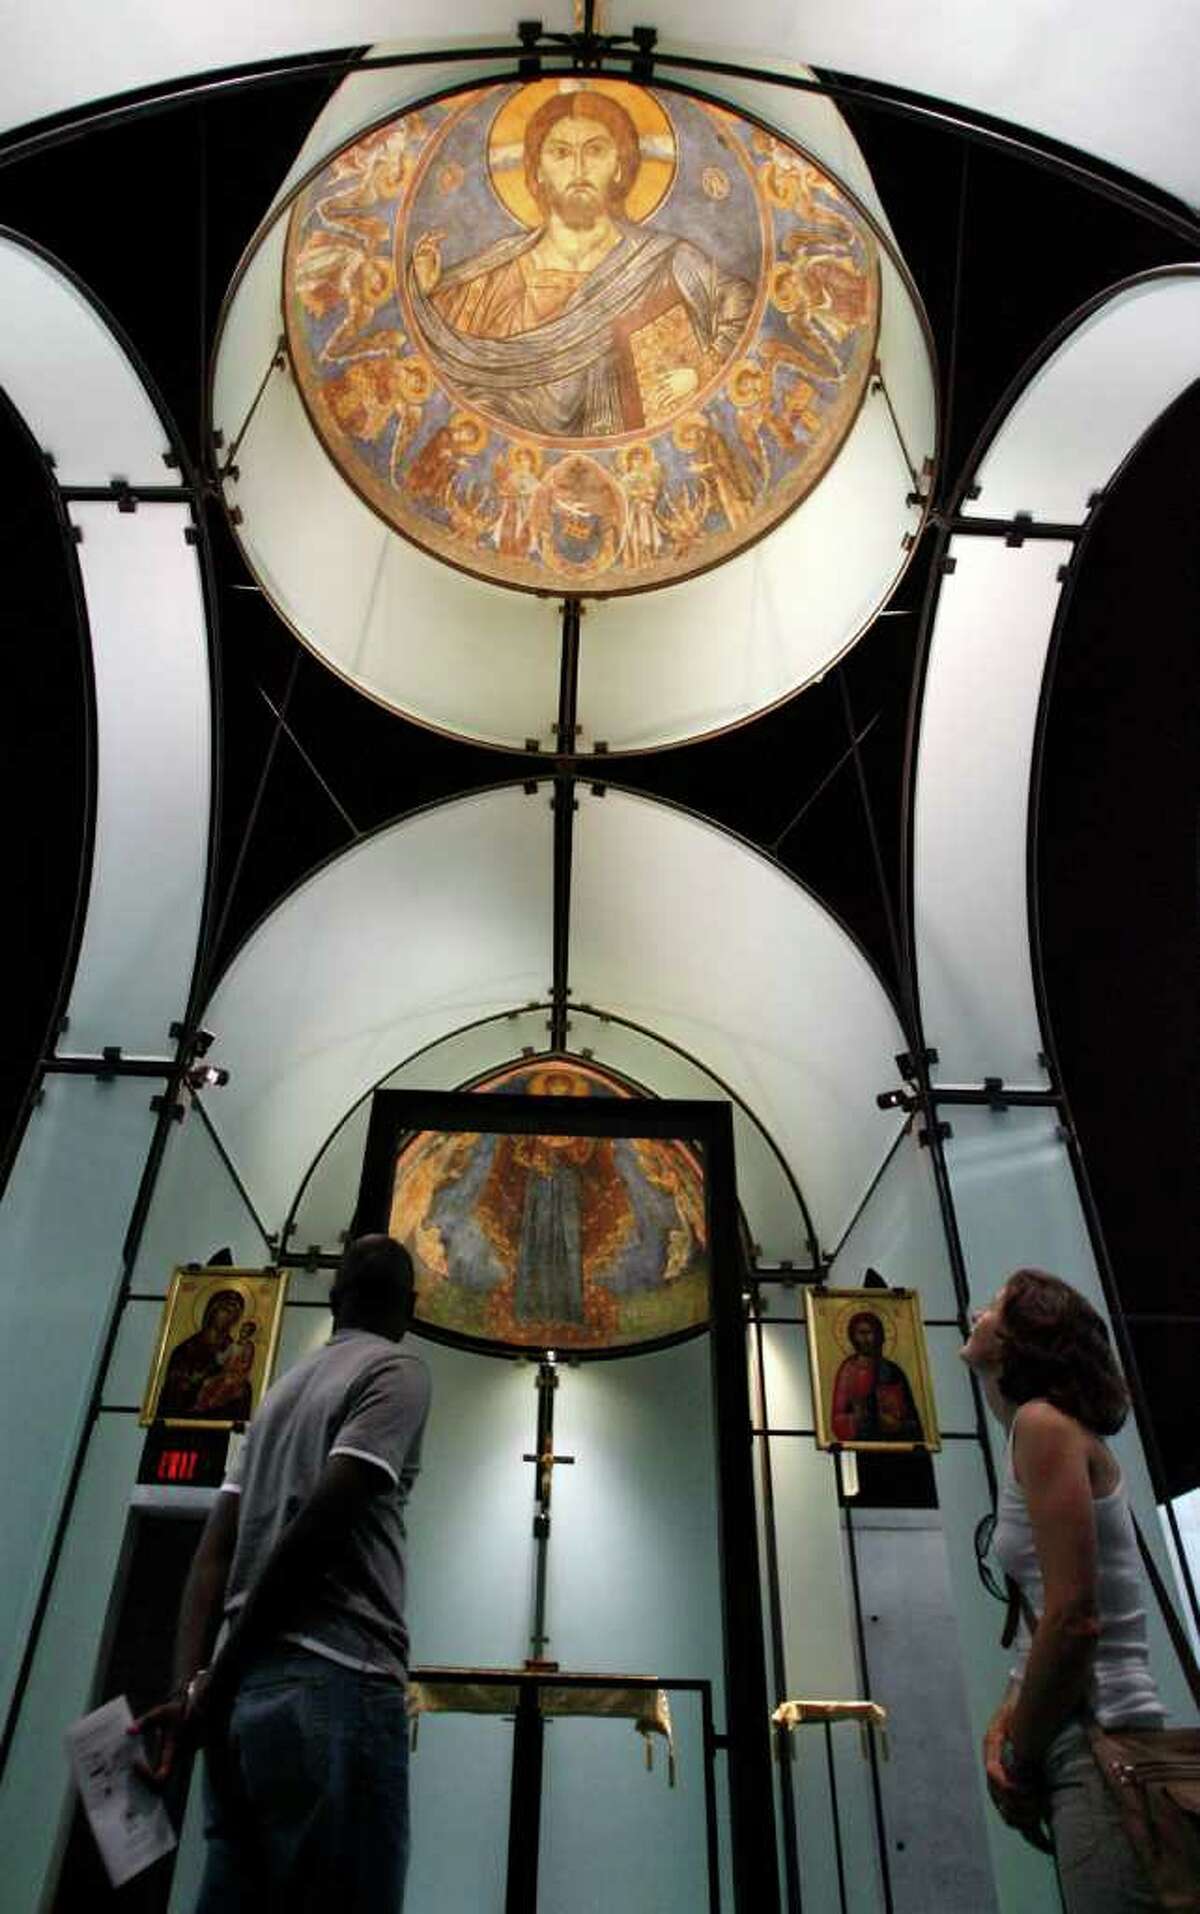 Visitors Mohamed Ndao, (cq) left, and Victoria Gardener,(cq) right, look at the multi-colored frescos on the dome and sides of the glass walls of the Byzantine Chapel, Thursday, Sept. 27, 2007. The Chapel is the only repository in the United States with intact Byzantine frescoes in the entire western hemisphere. These masterworks from the 13th century -- a dome and an apse -- were ripped and stolen out of a chapel near Lysi in Cyprus in the 1980's, cut into pieces, and smuggled off the island by thieves prepared to sell them piece by piece. The fresco fragments were rescued from the thieves by The Menil Foundation with the knowledge and approval of the Church of Cyprus, the rightful owner of the frescoes. ( Karen Warren / Chronicle)